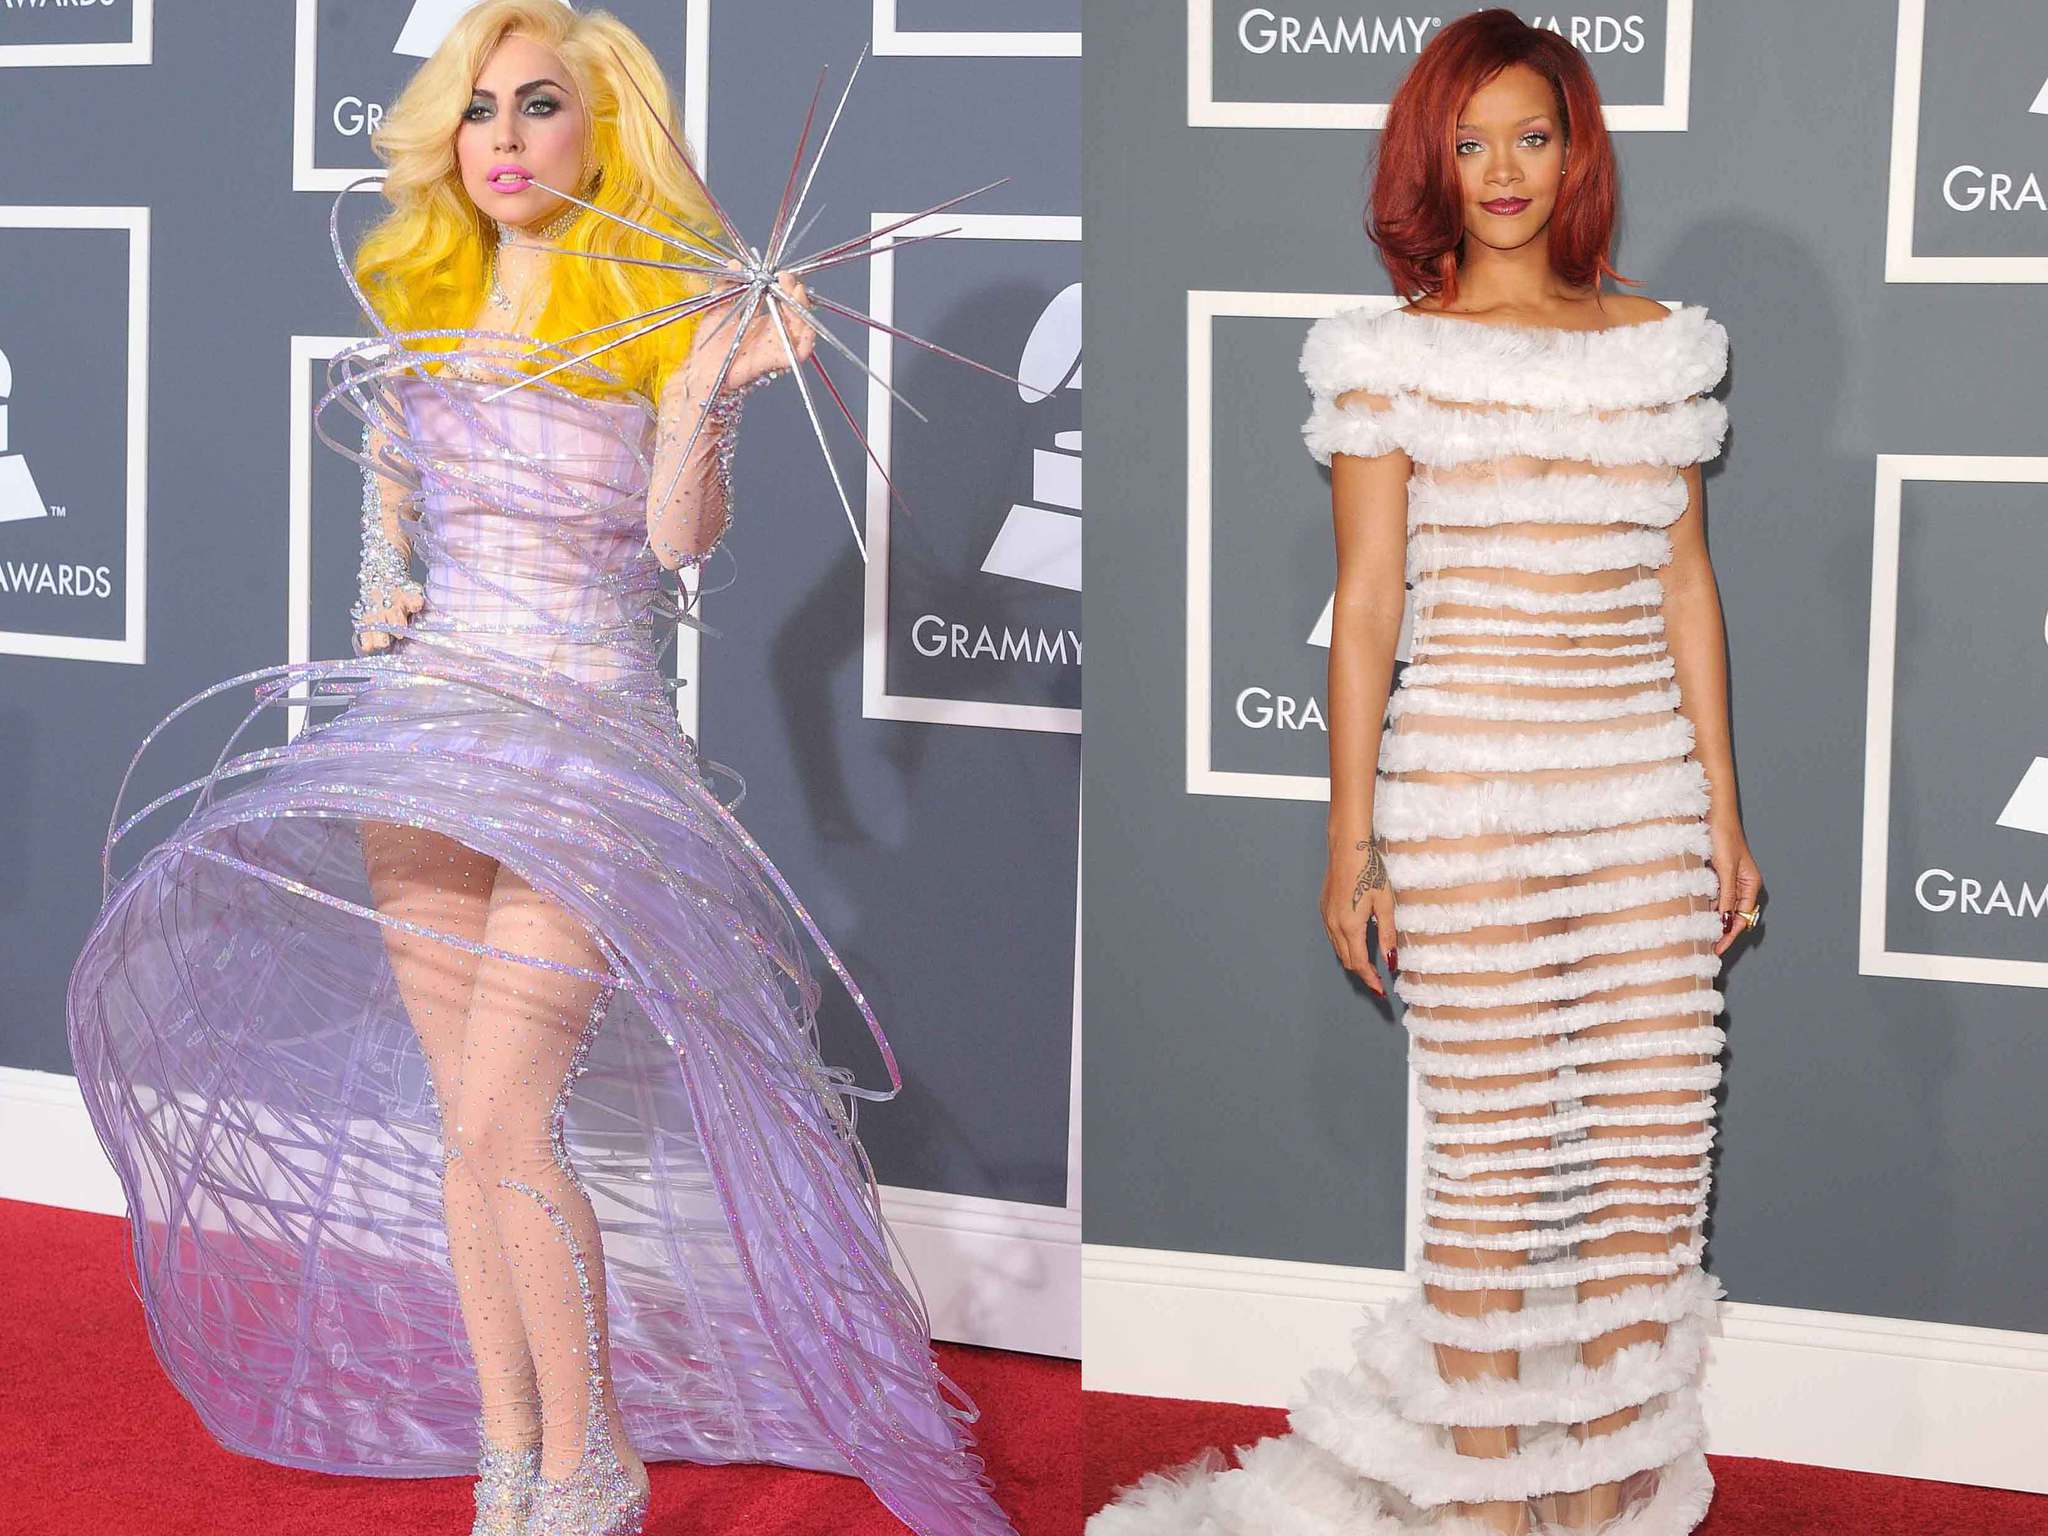 Grammy Red Carpet Casual Style Is Here to Stay